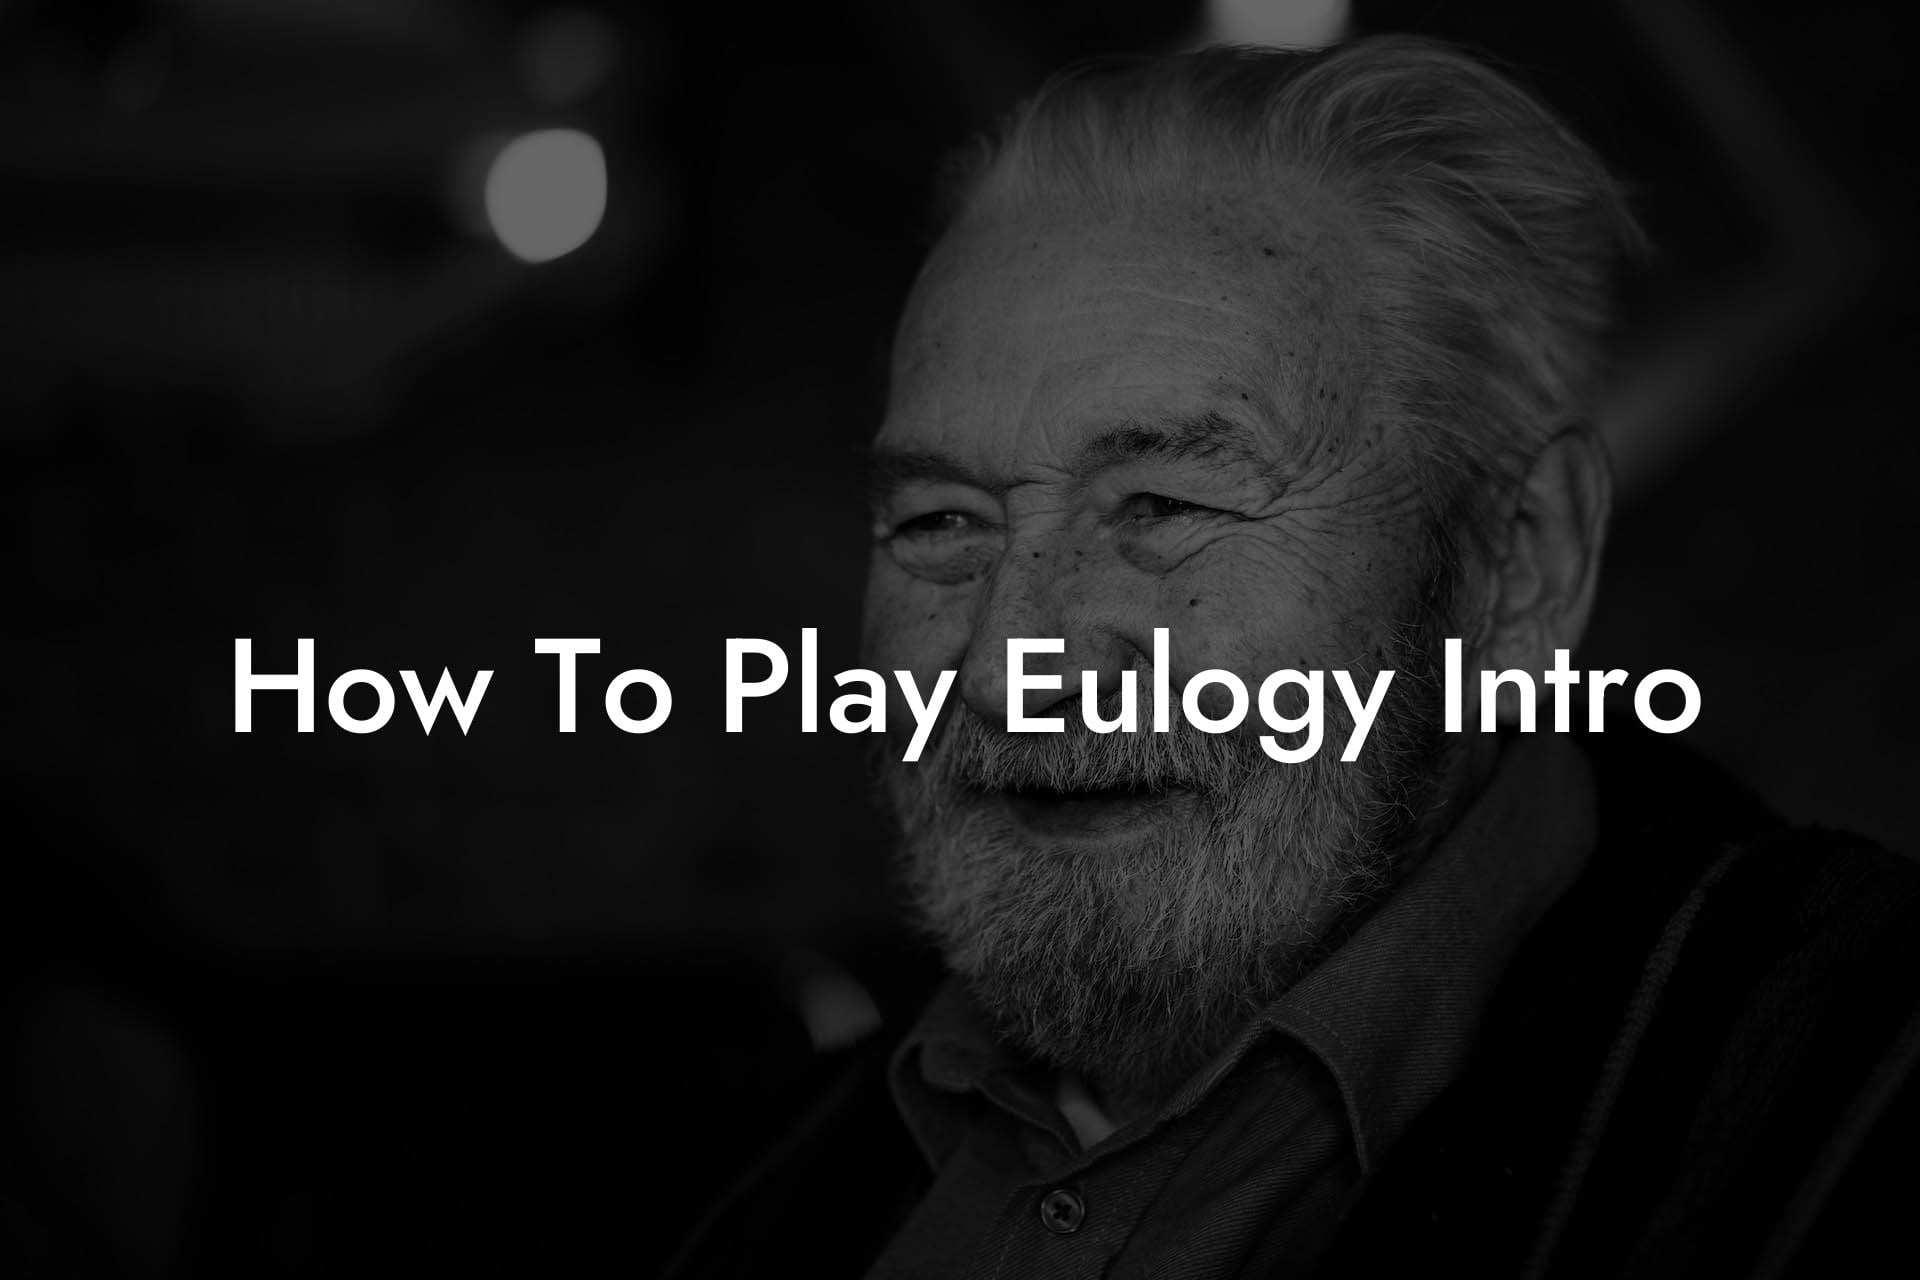 How To Play Eulogy Intro